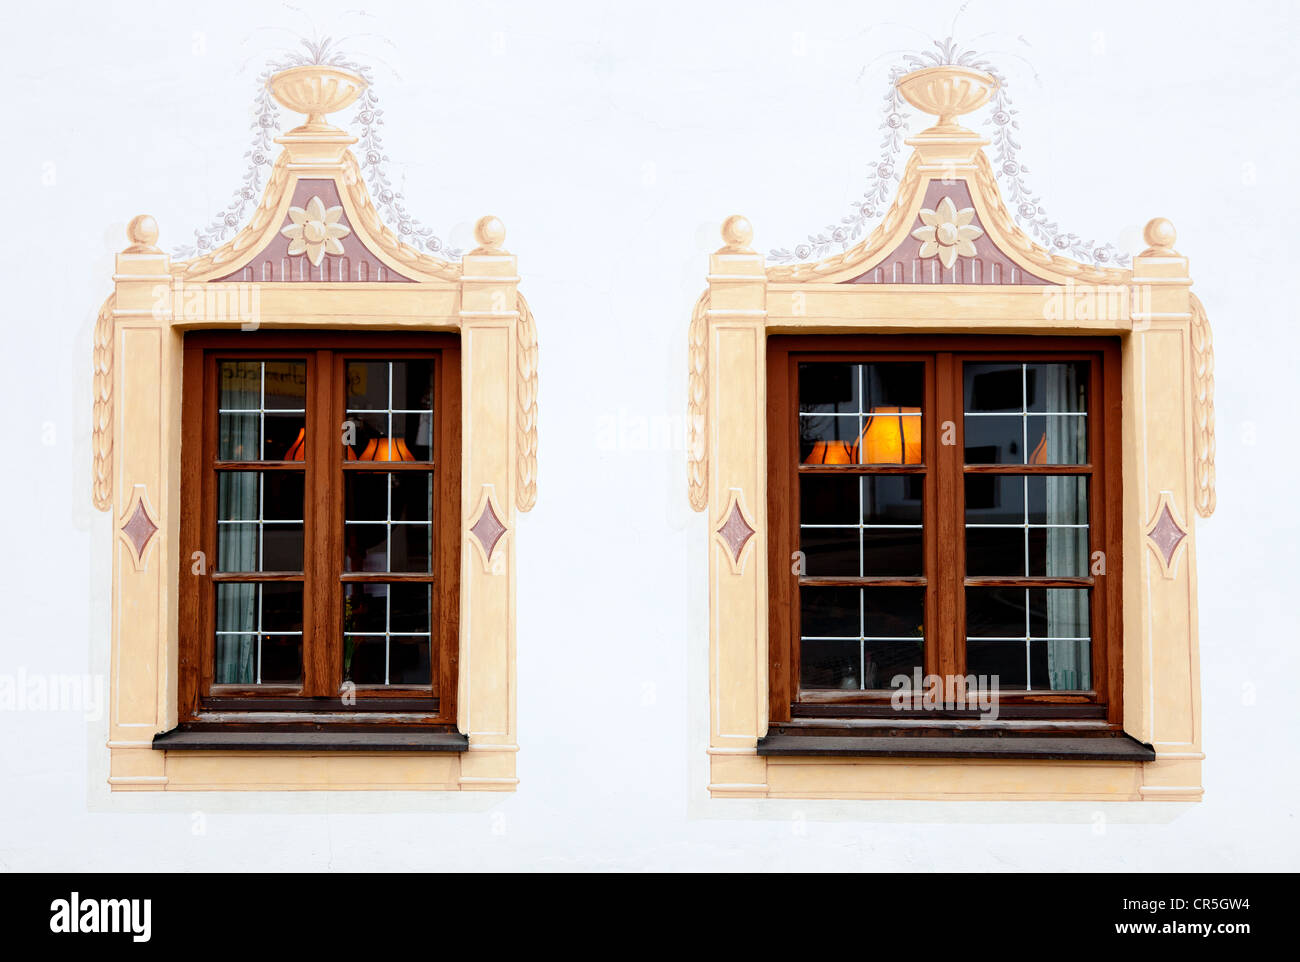 An attractive building painted in Trompe L'oeil style. Image taken in Oberammergau, Germany Stock Photo